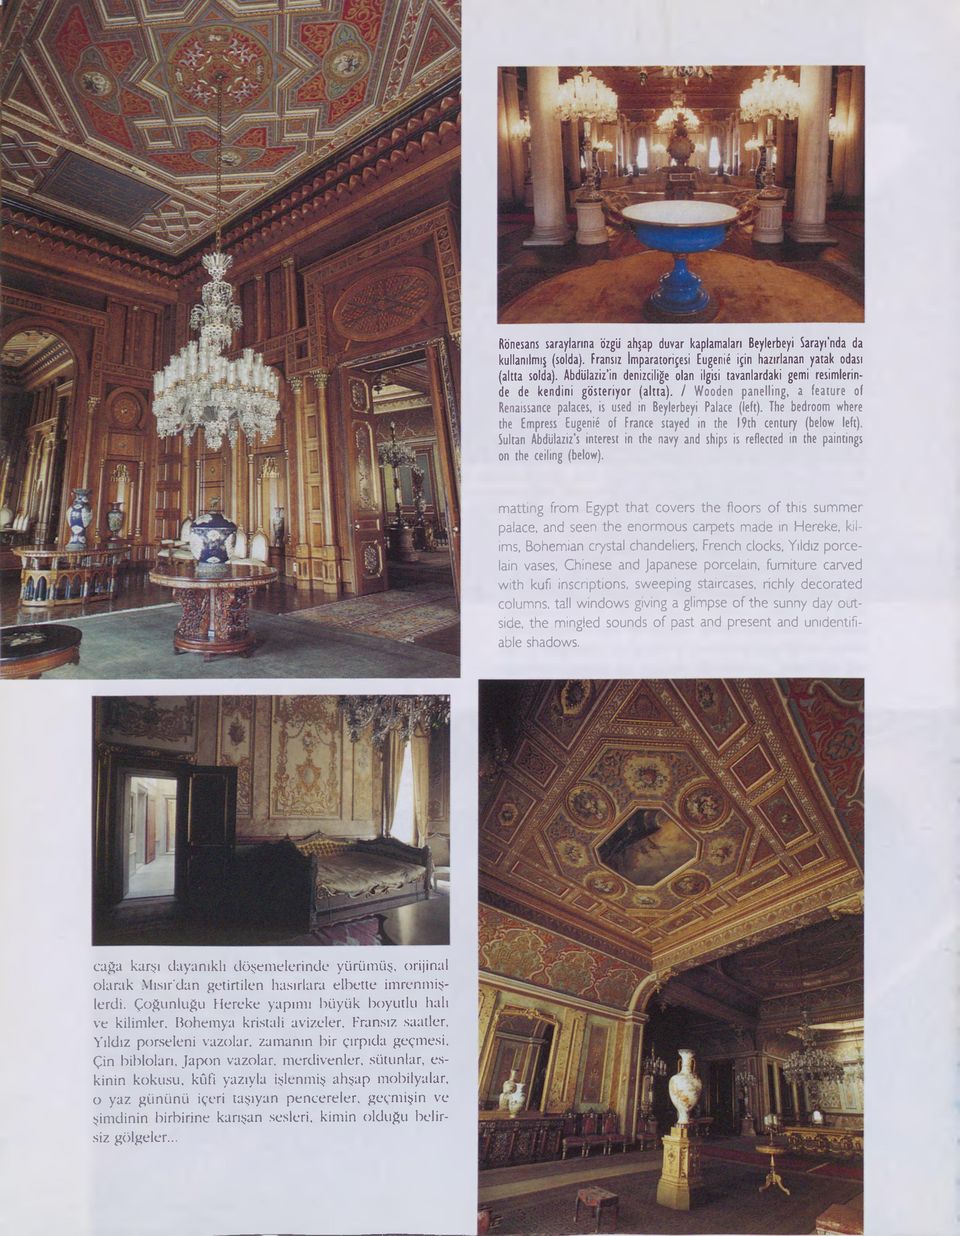 / W ooden p a n e llin g, a fe a tu re of Renaissance palaces, is used in Beylerbeyi Palace (left). The bedroom where the Em press Eugenié of France stayed in the 19th century (below left).